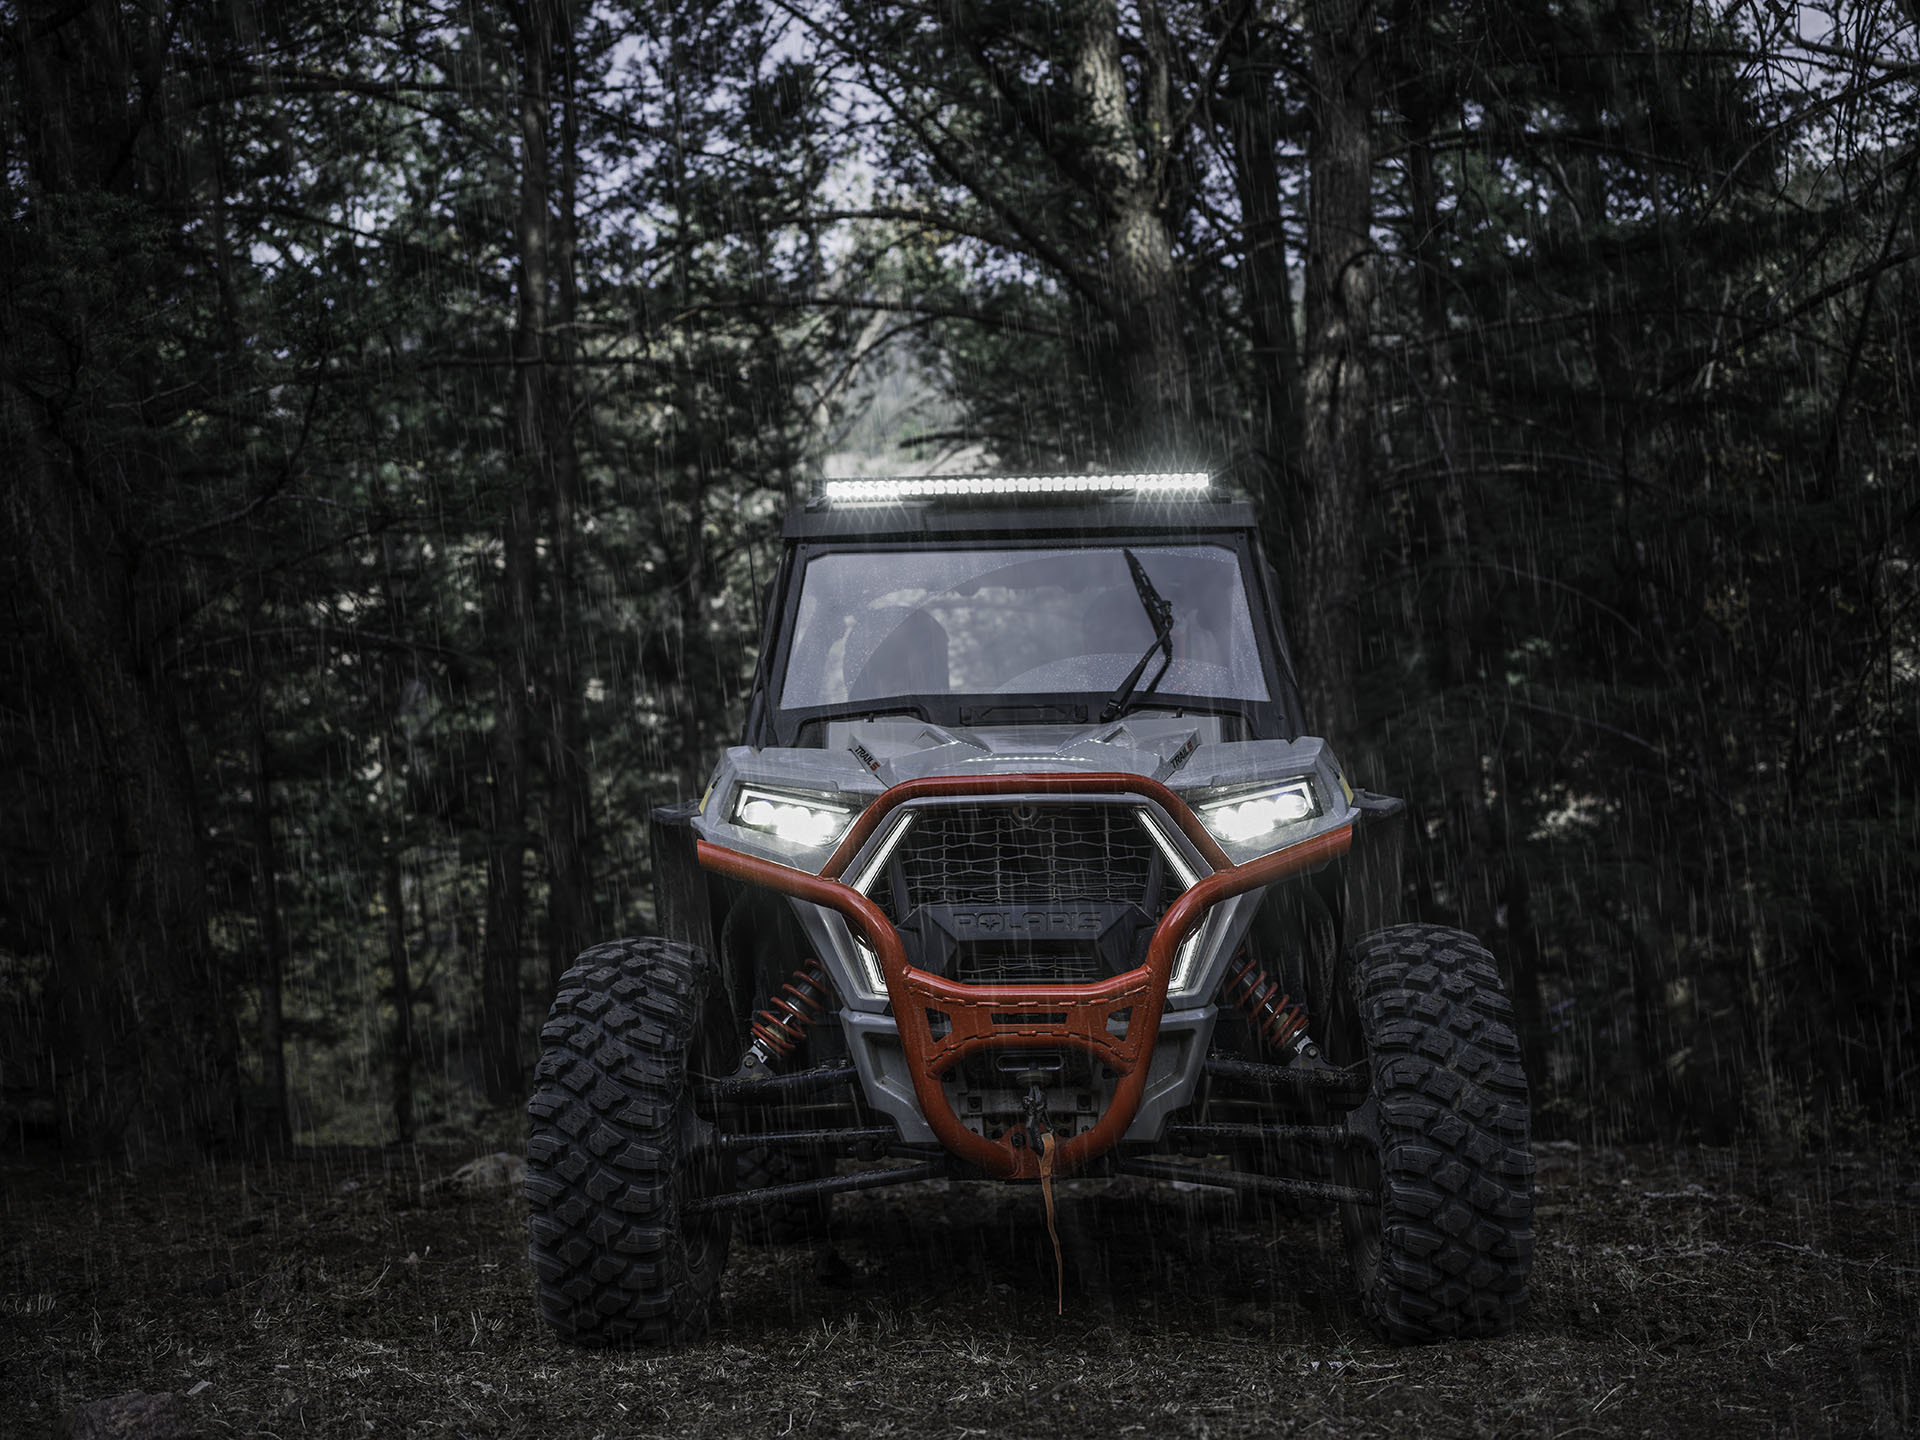 2023 Polaris RZR Trail S 1000 Ultimate in Middletown, New York - Photo 11